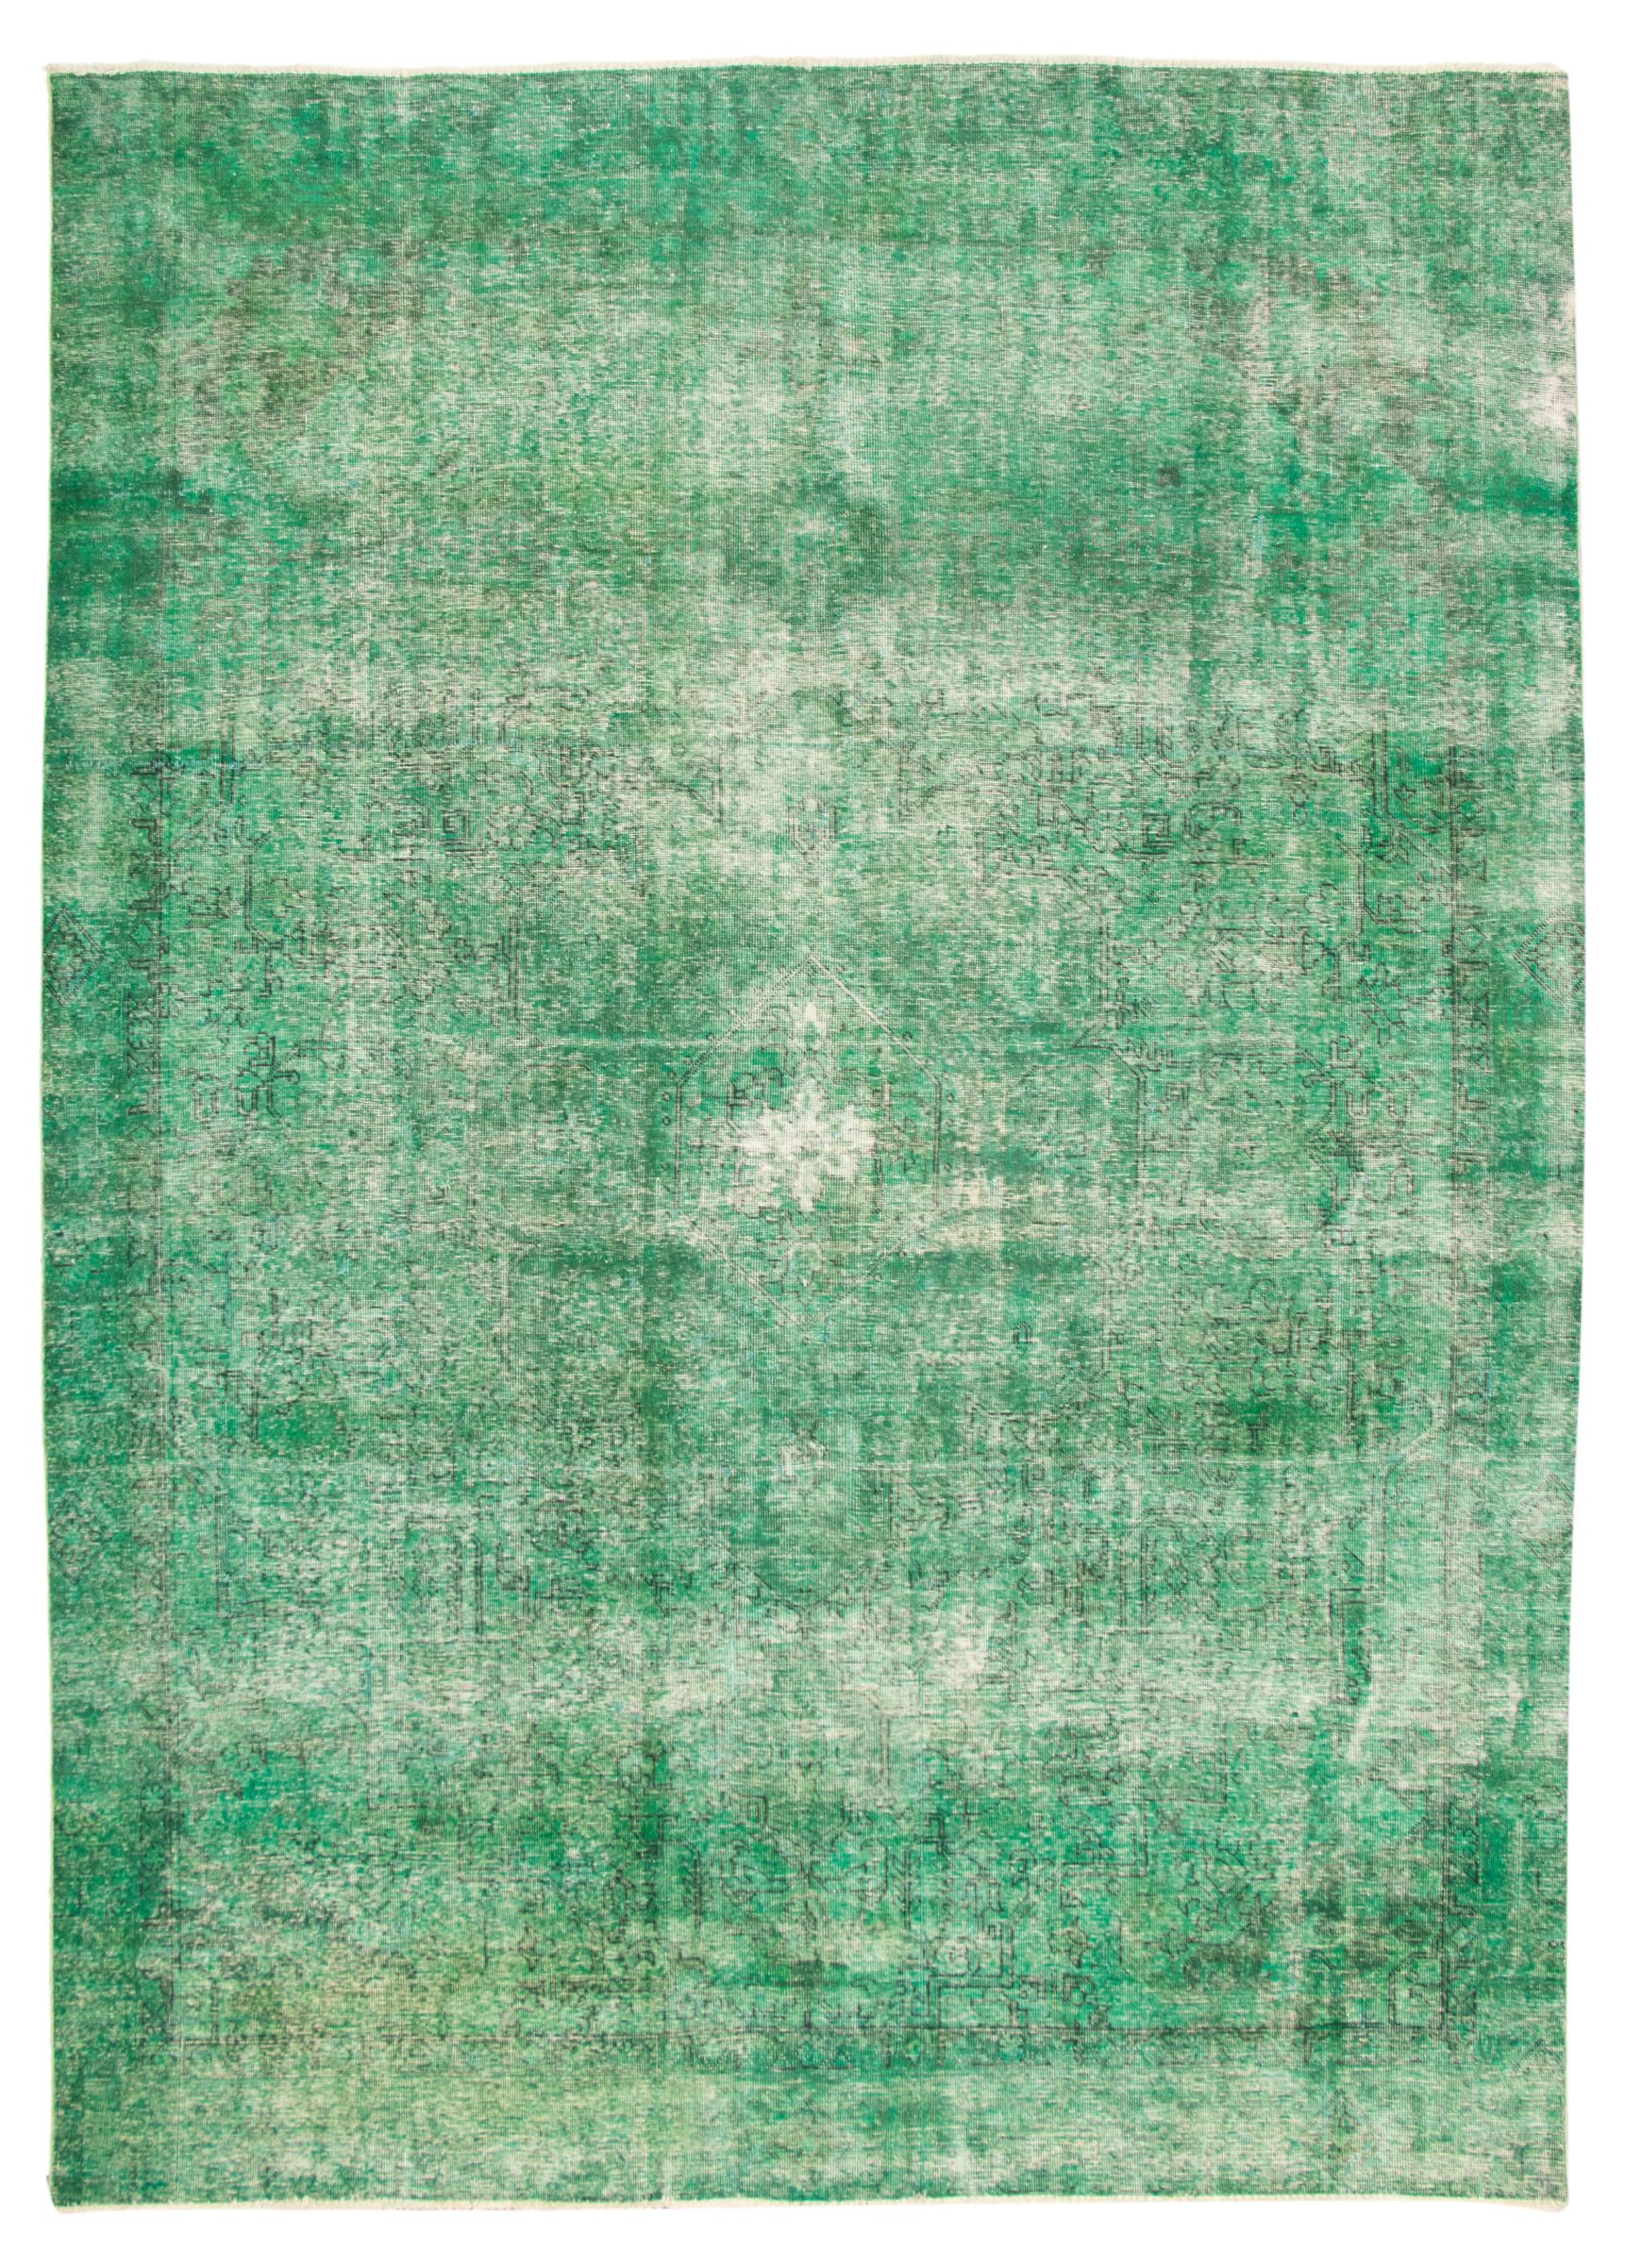 Hand-knotted Color Transition Green Wool Rug 8'9" x 12'2" Size: 8'9" x 12'2"  